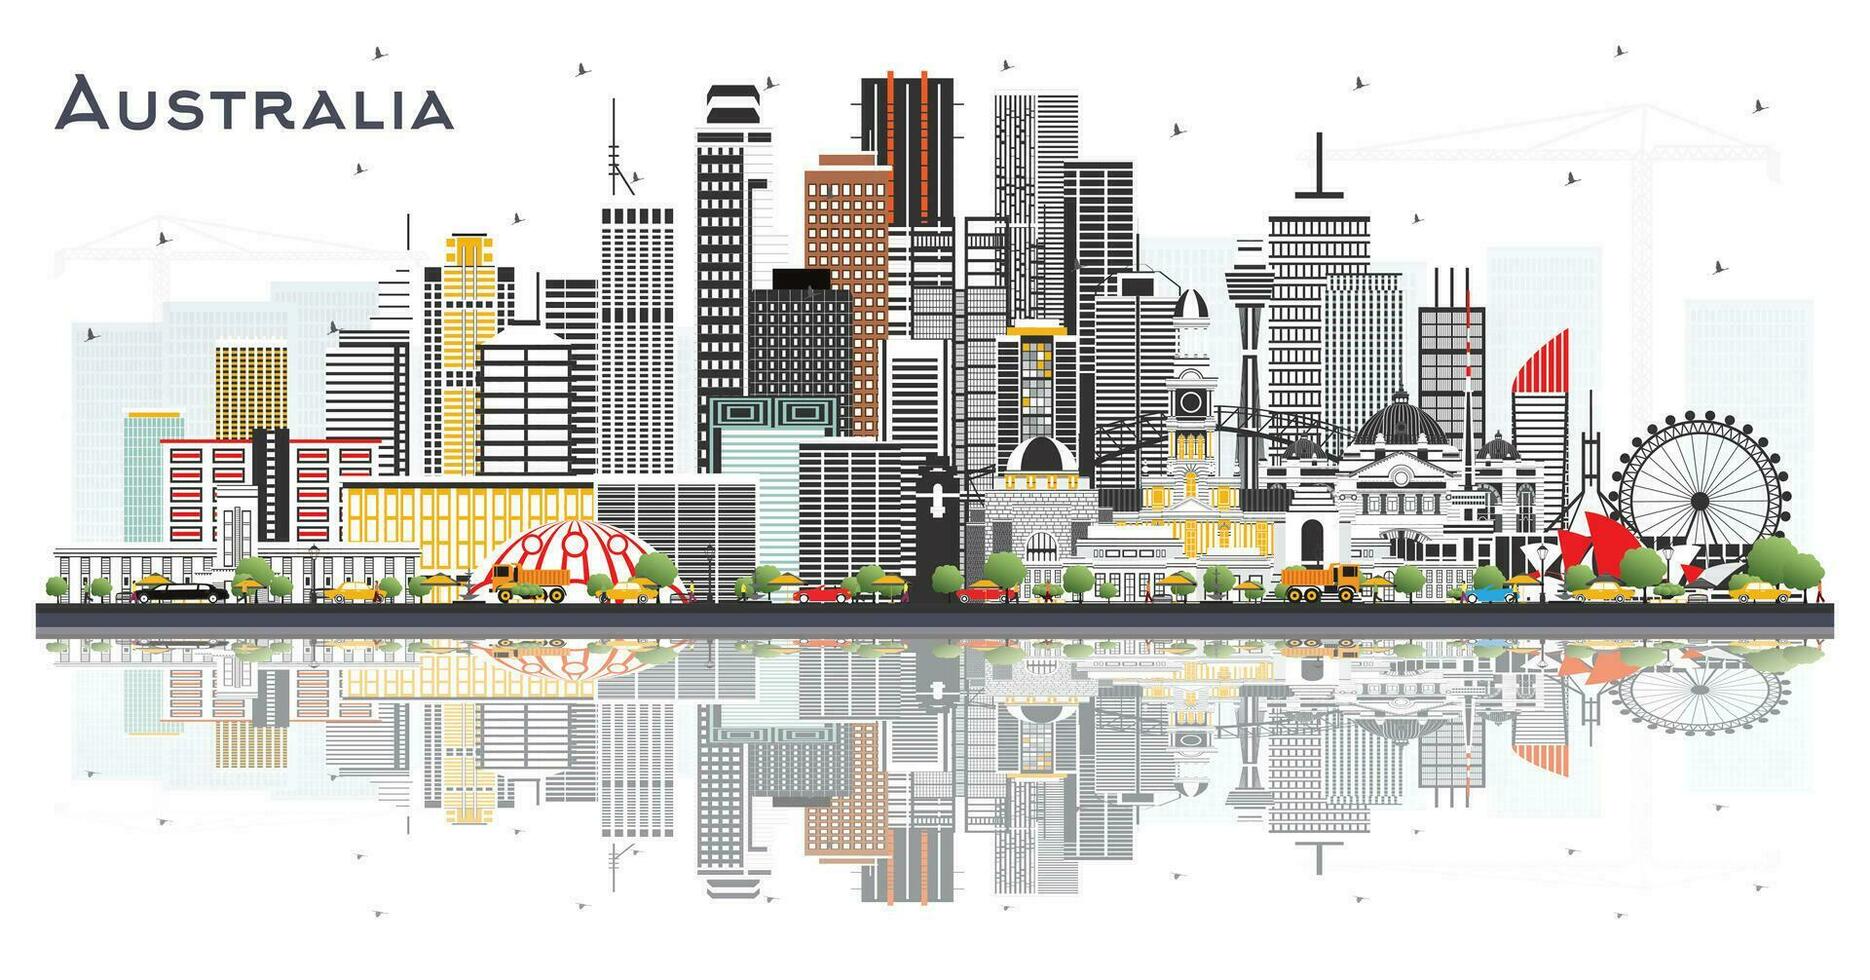 Australia City Skyline with Gray Buildings and reflections Isolated on White. Tourism Concept with Historic Architecture. Australia Cityscape with Landmarks. Sydney. Melbourne. vector